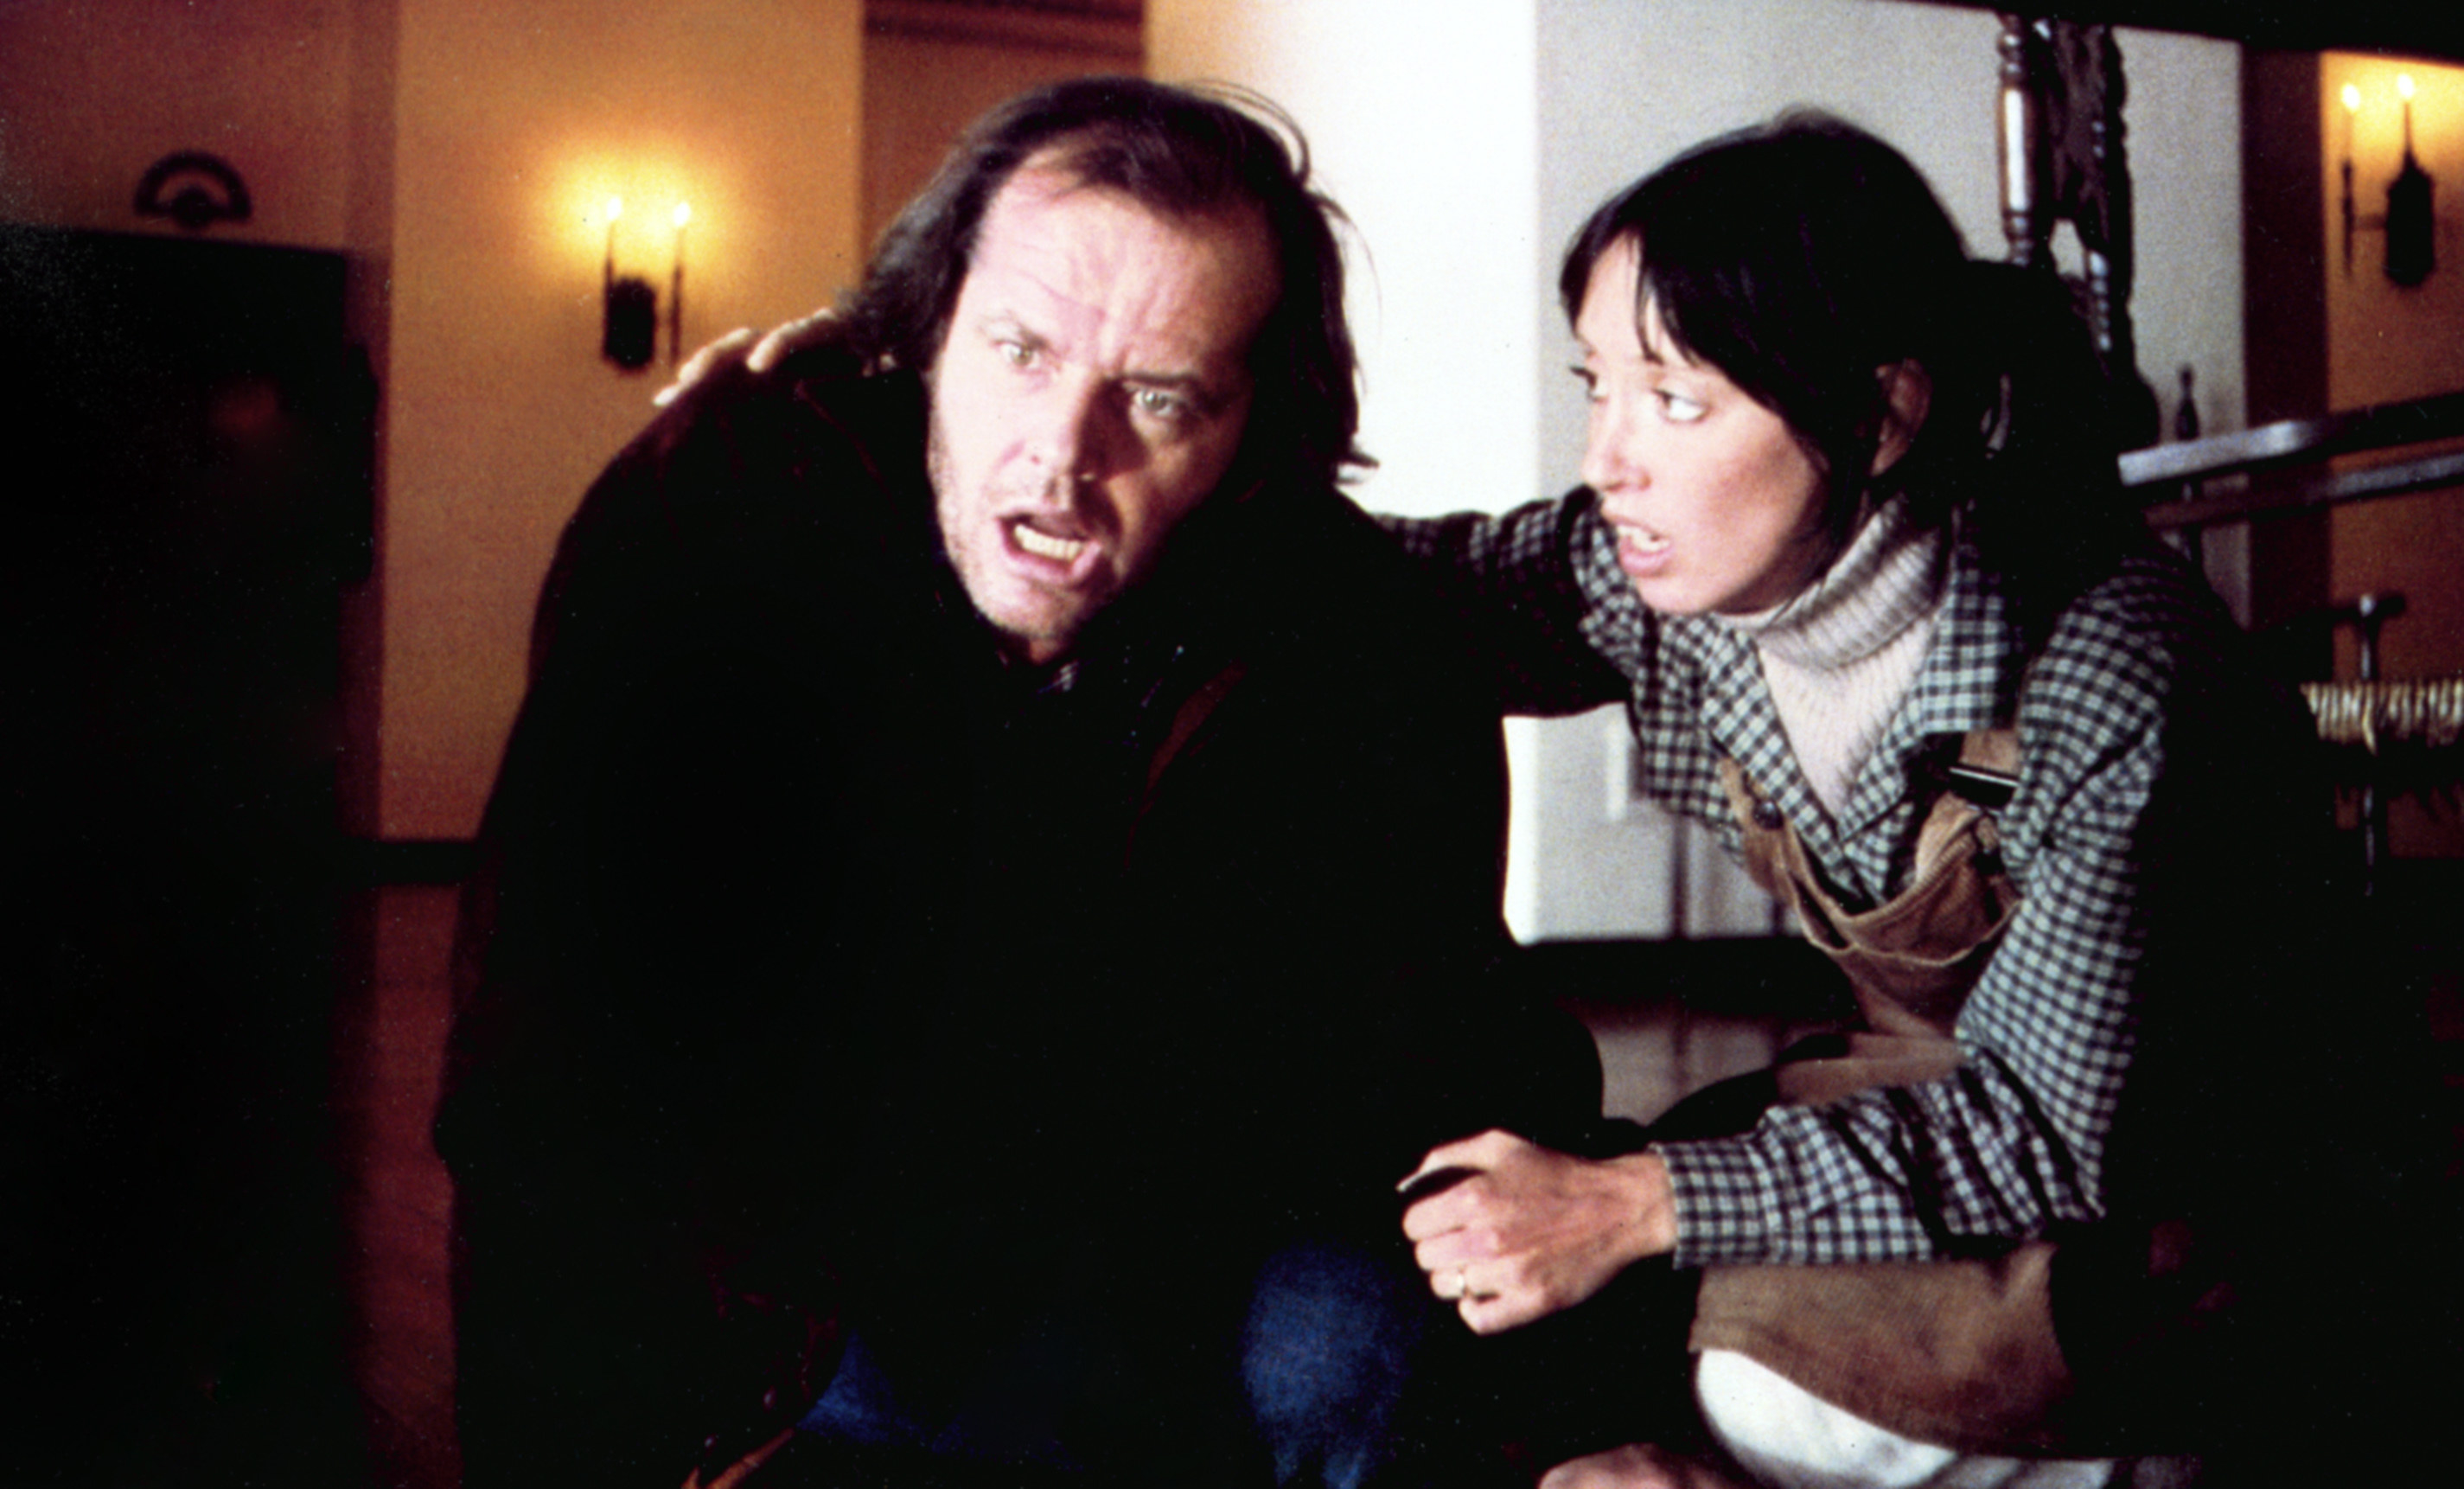 Jack Nicholson and Shelley Duvall crouch on the floor